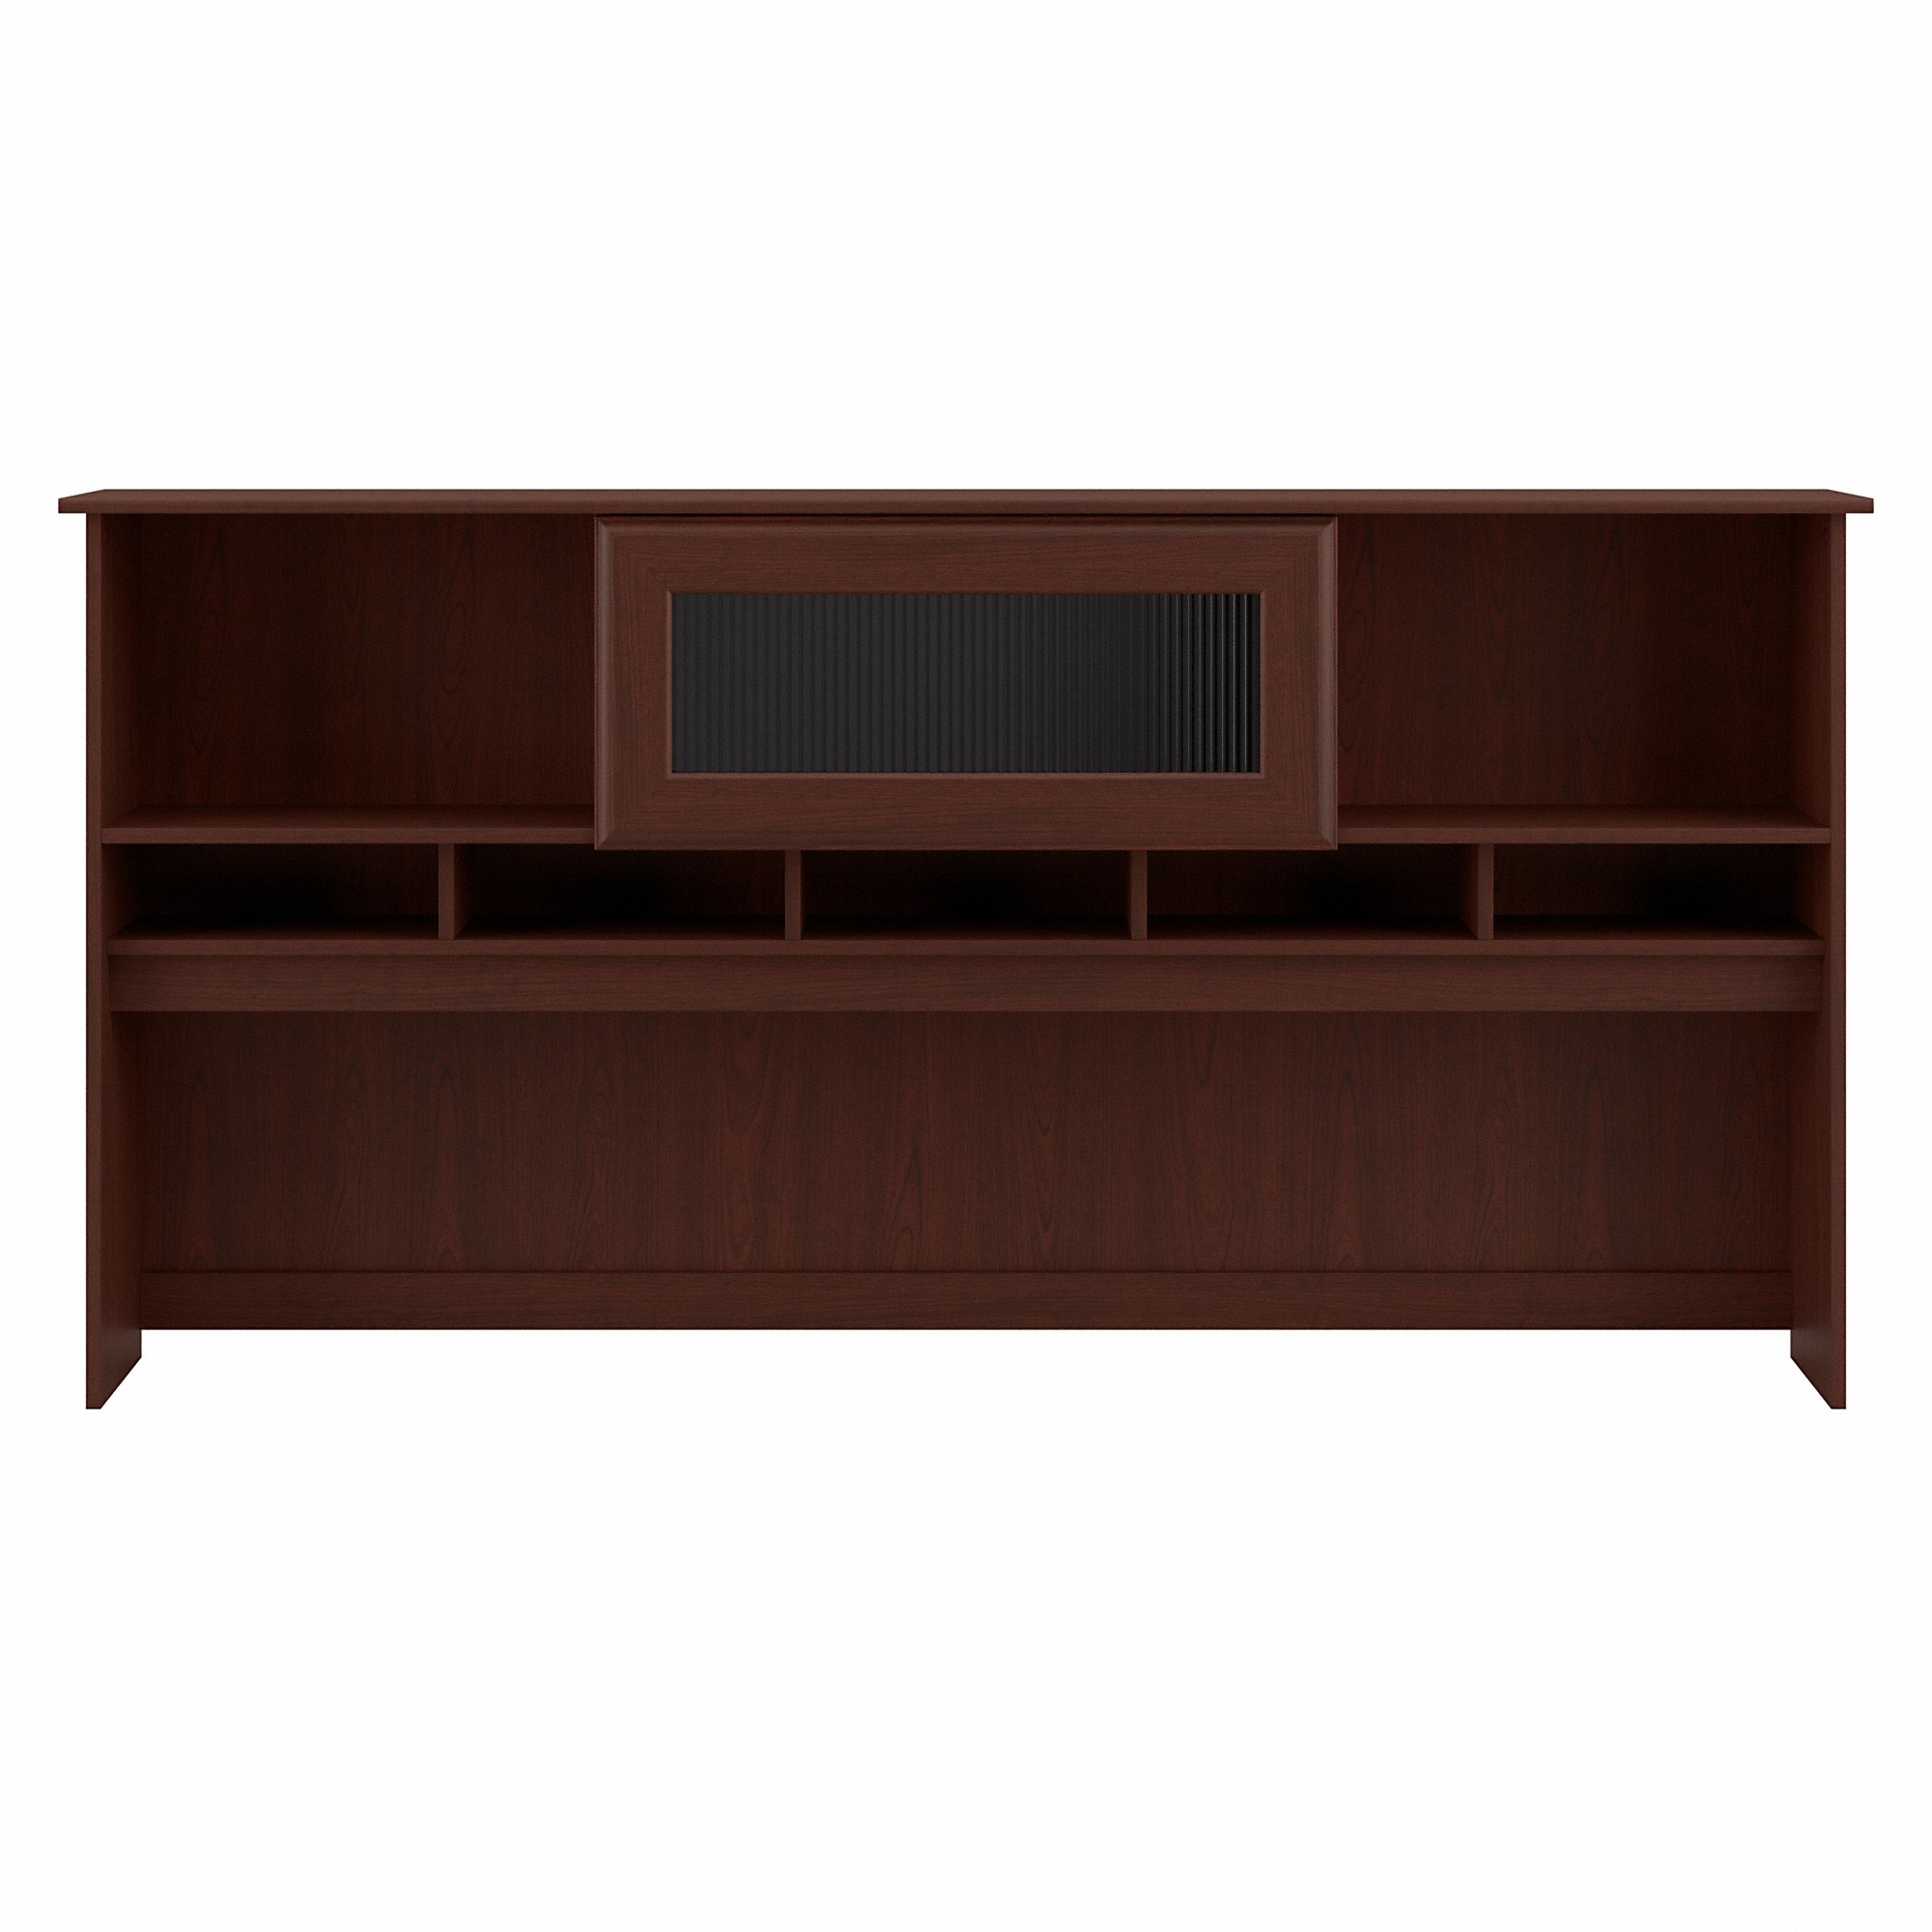 Cabot Modern 72W Hutch with Storage, Fits 72 W Desk (sold separately) in Harvest Cherry - image 4 of 8